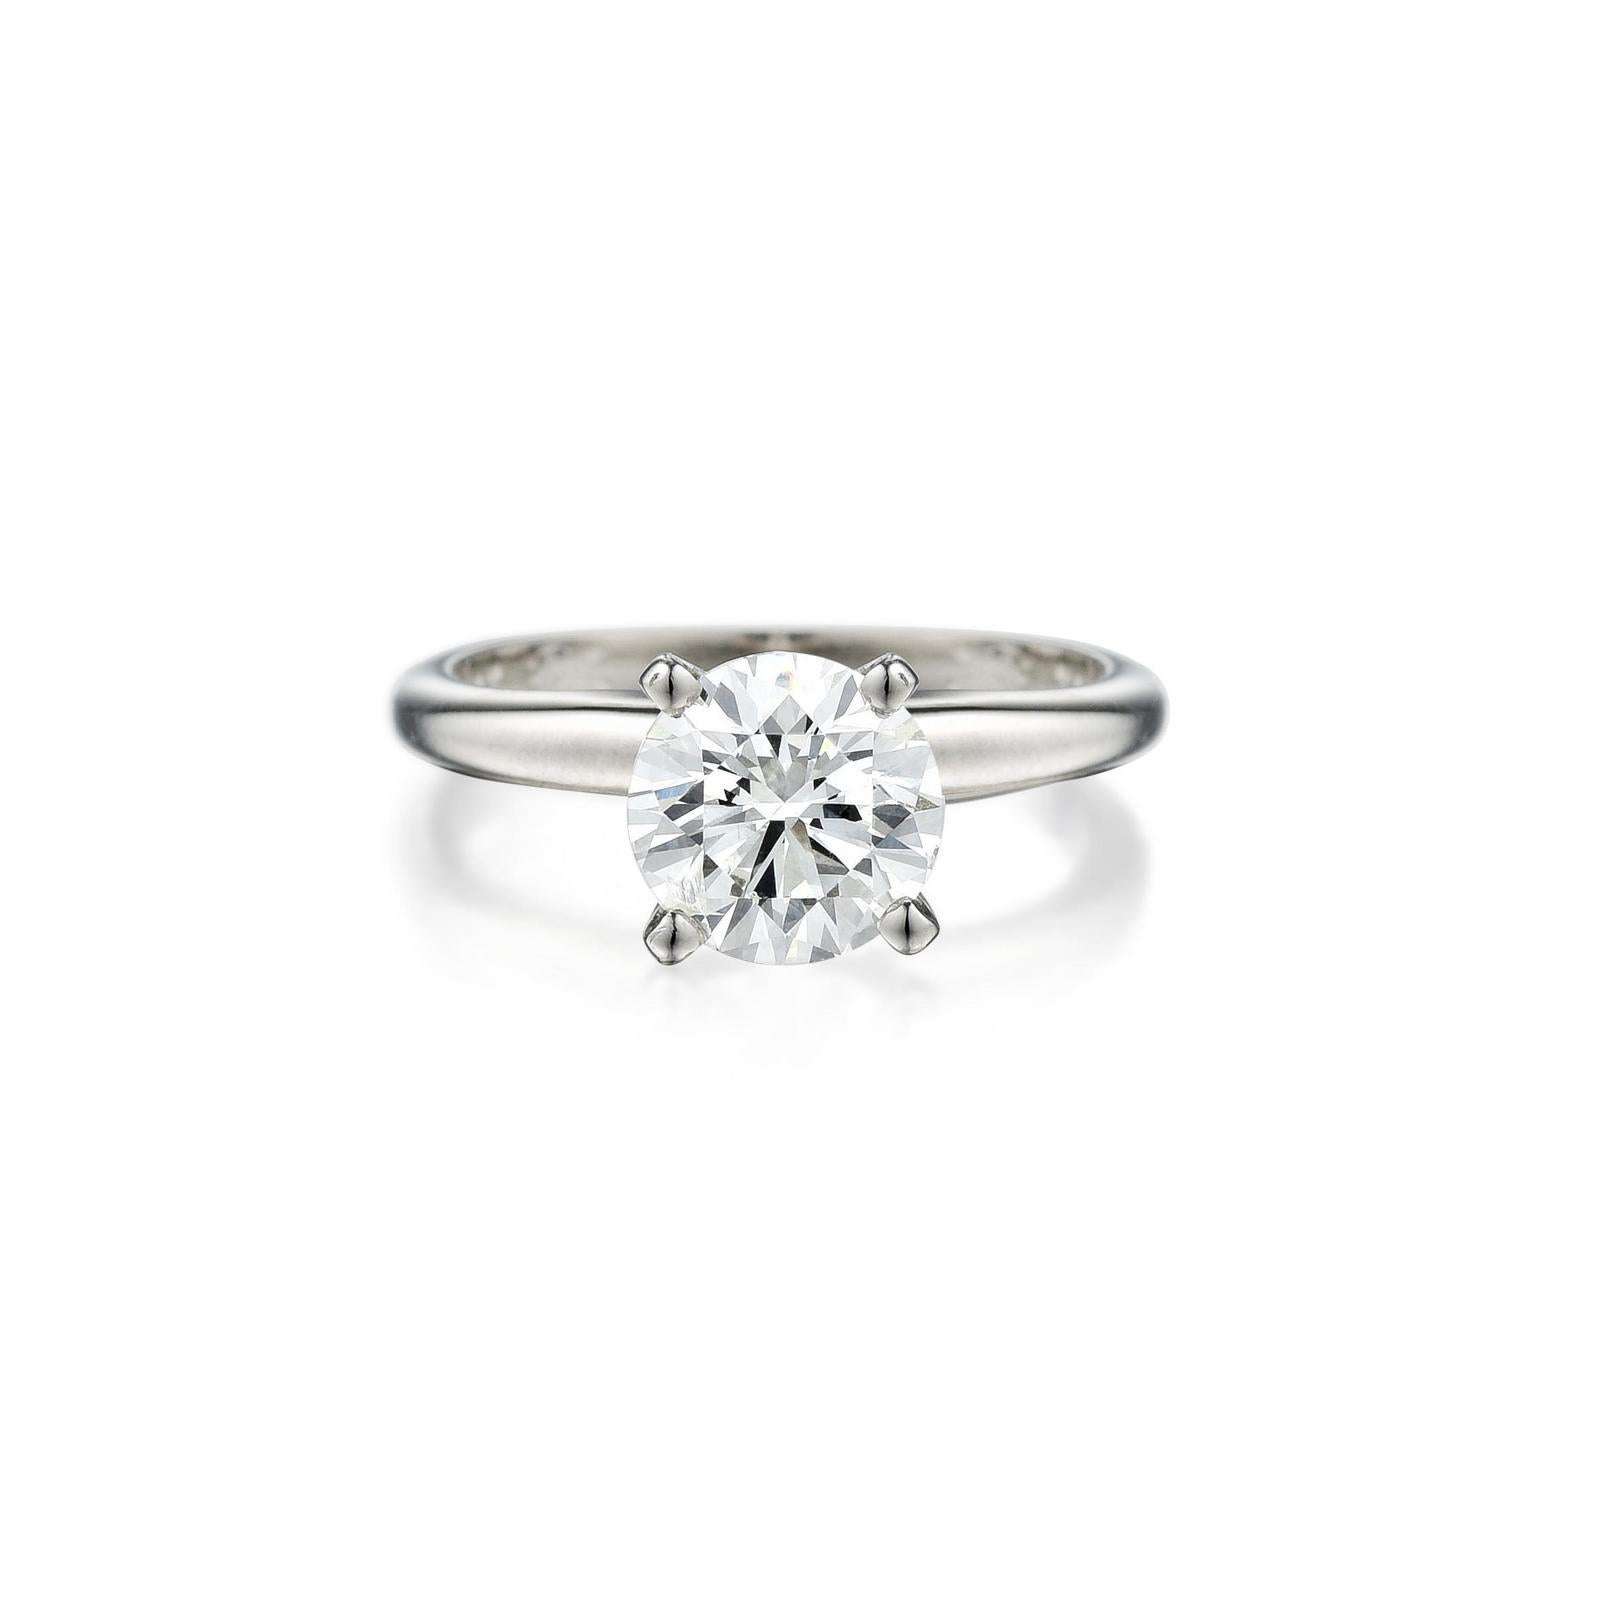 This spectacular diamond ring has been handmae by Antinori Fine Jewels. This 2 carat GIA certified IF Clarity and D Color round cut excellent diamond ring has been handmade in Italy in solid platinum.

